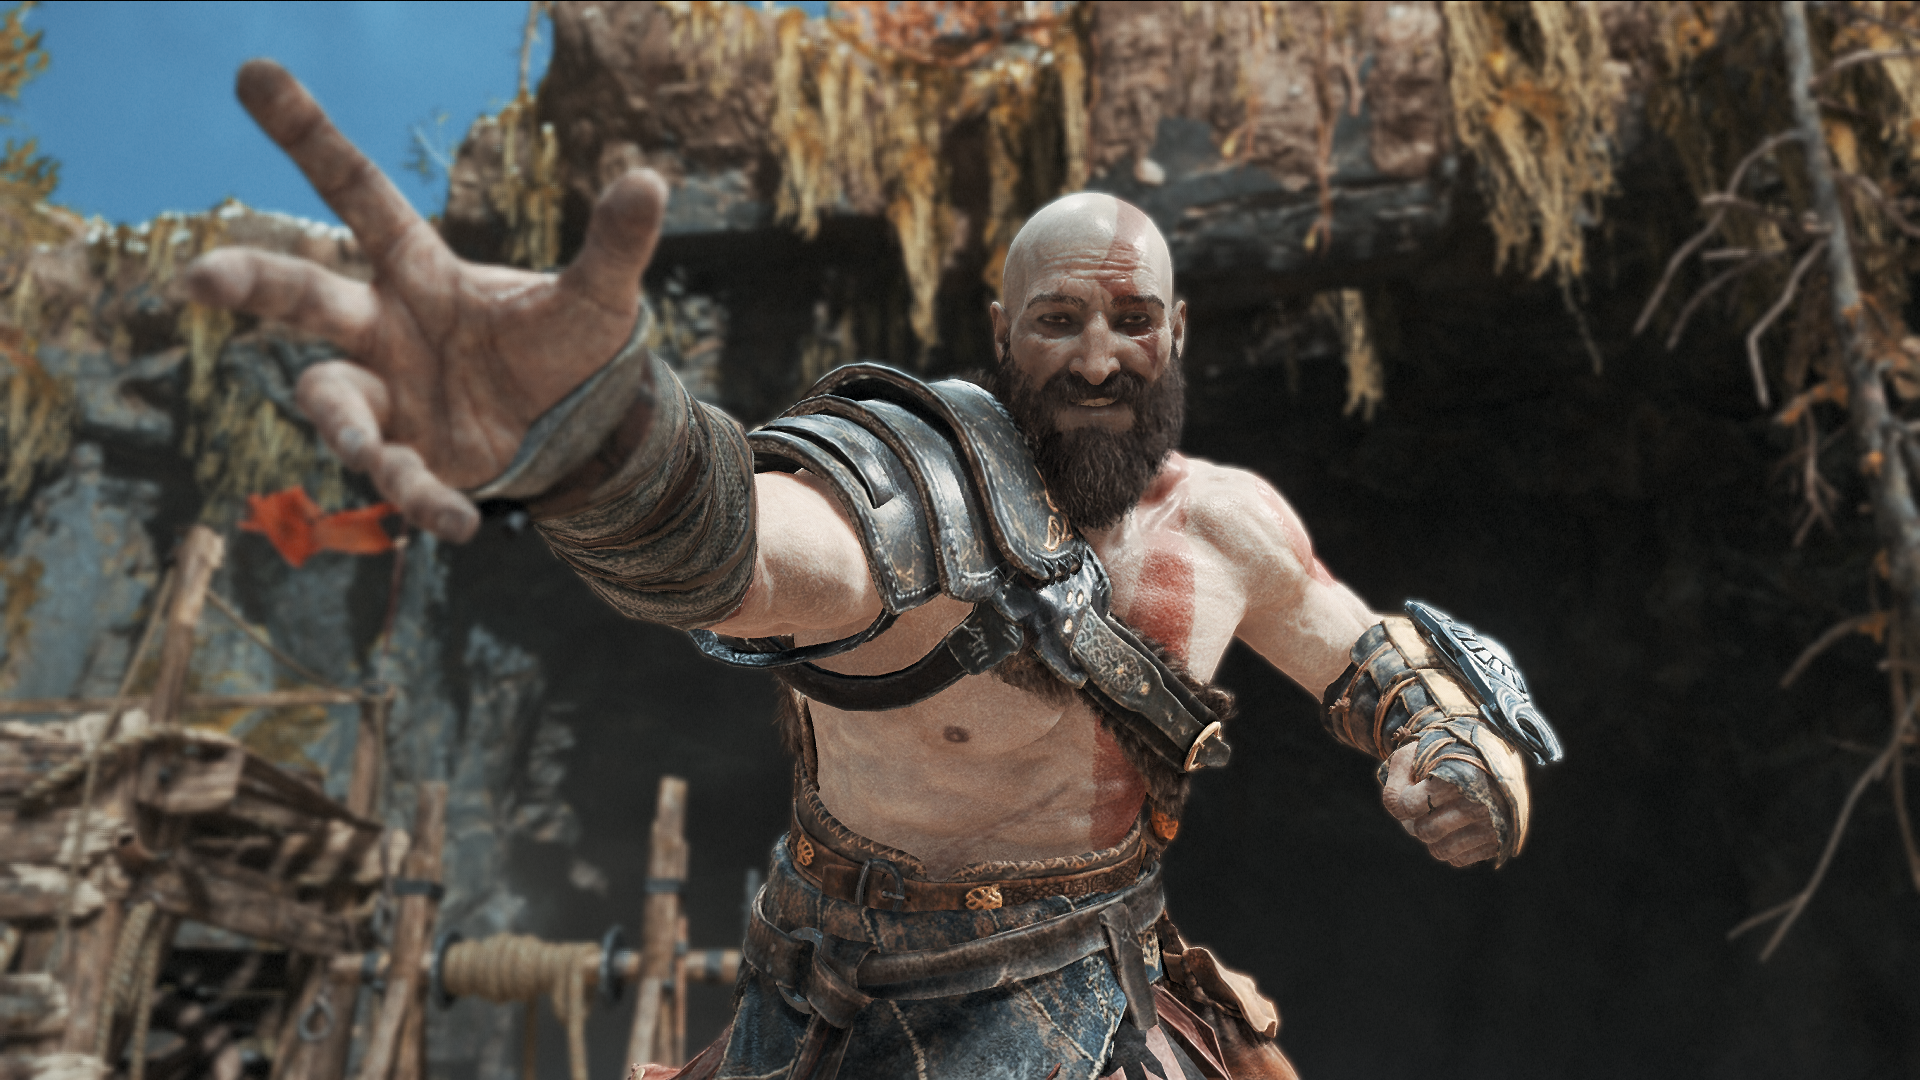 God of War is Sony's biggest PC launch to date